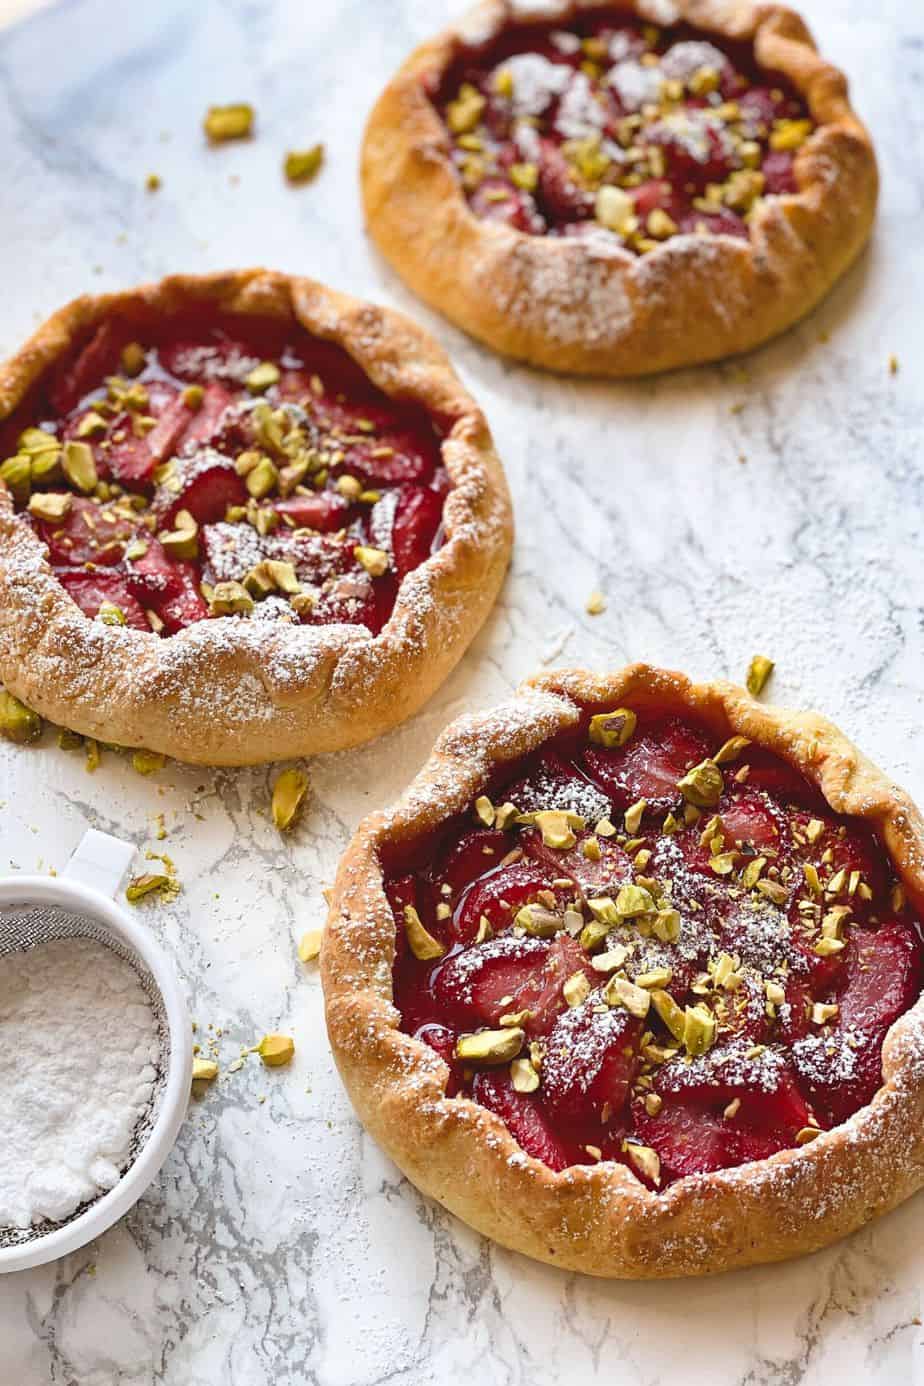 Strawberry pistachio galettes - The easiest and most delicious strawberry dessert recipe. These min yummy strawberry pies are made with cottage cheese, fresh strawberries and topped with crushed pistachios. Simply the best and easiest homemade mini pie recipe that no one cant resist. - The Yummy Bowl